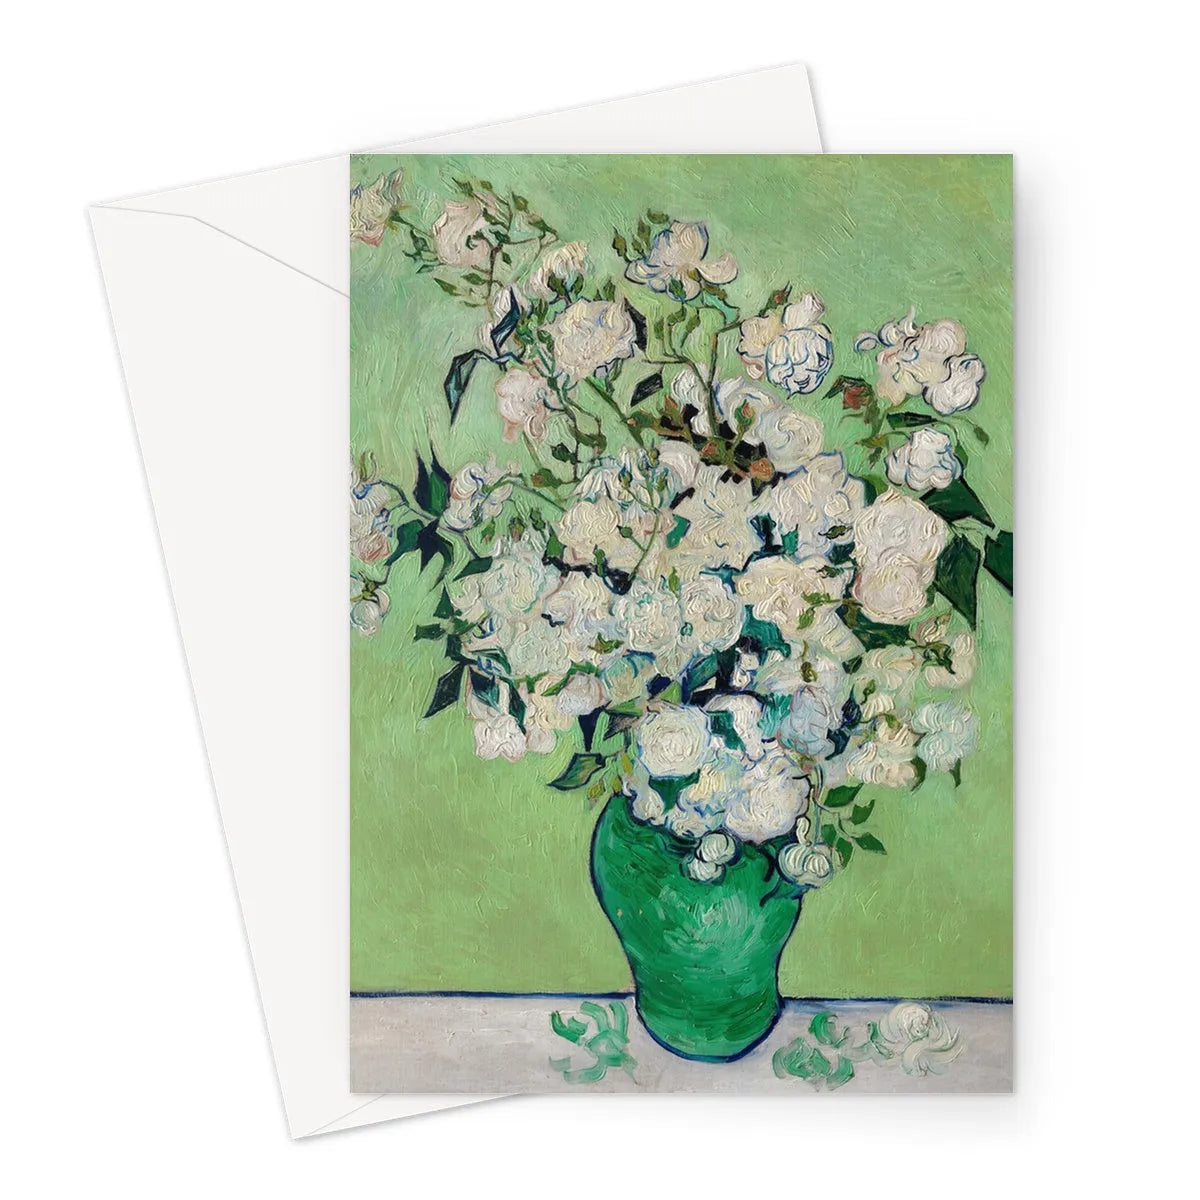 Roses By Vincent Van Gogh Greeting Card - A5 Portrait / 1 Card - Greeting & Note Cards - Aesthetic Art